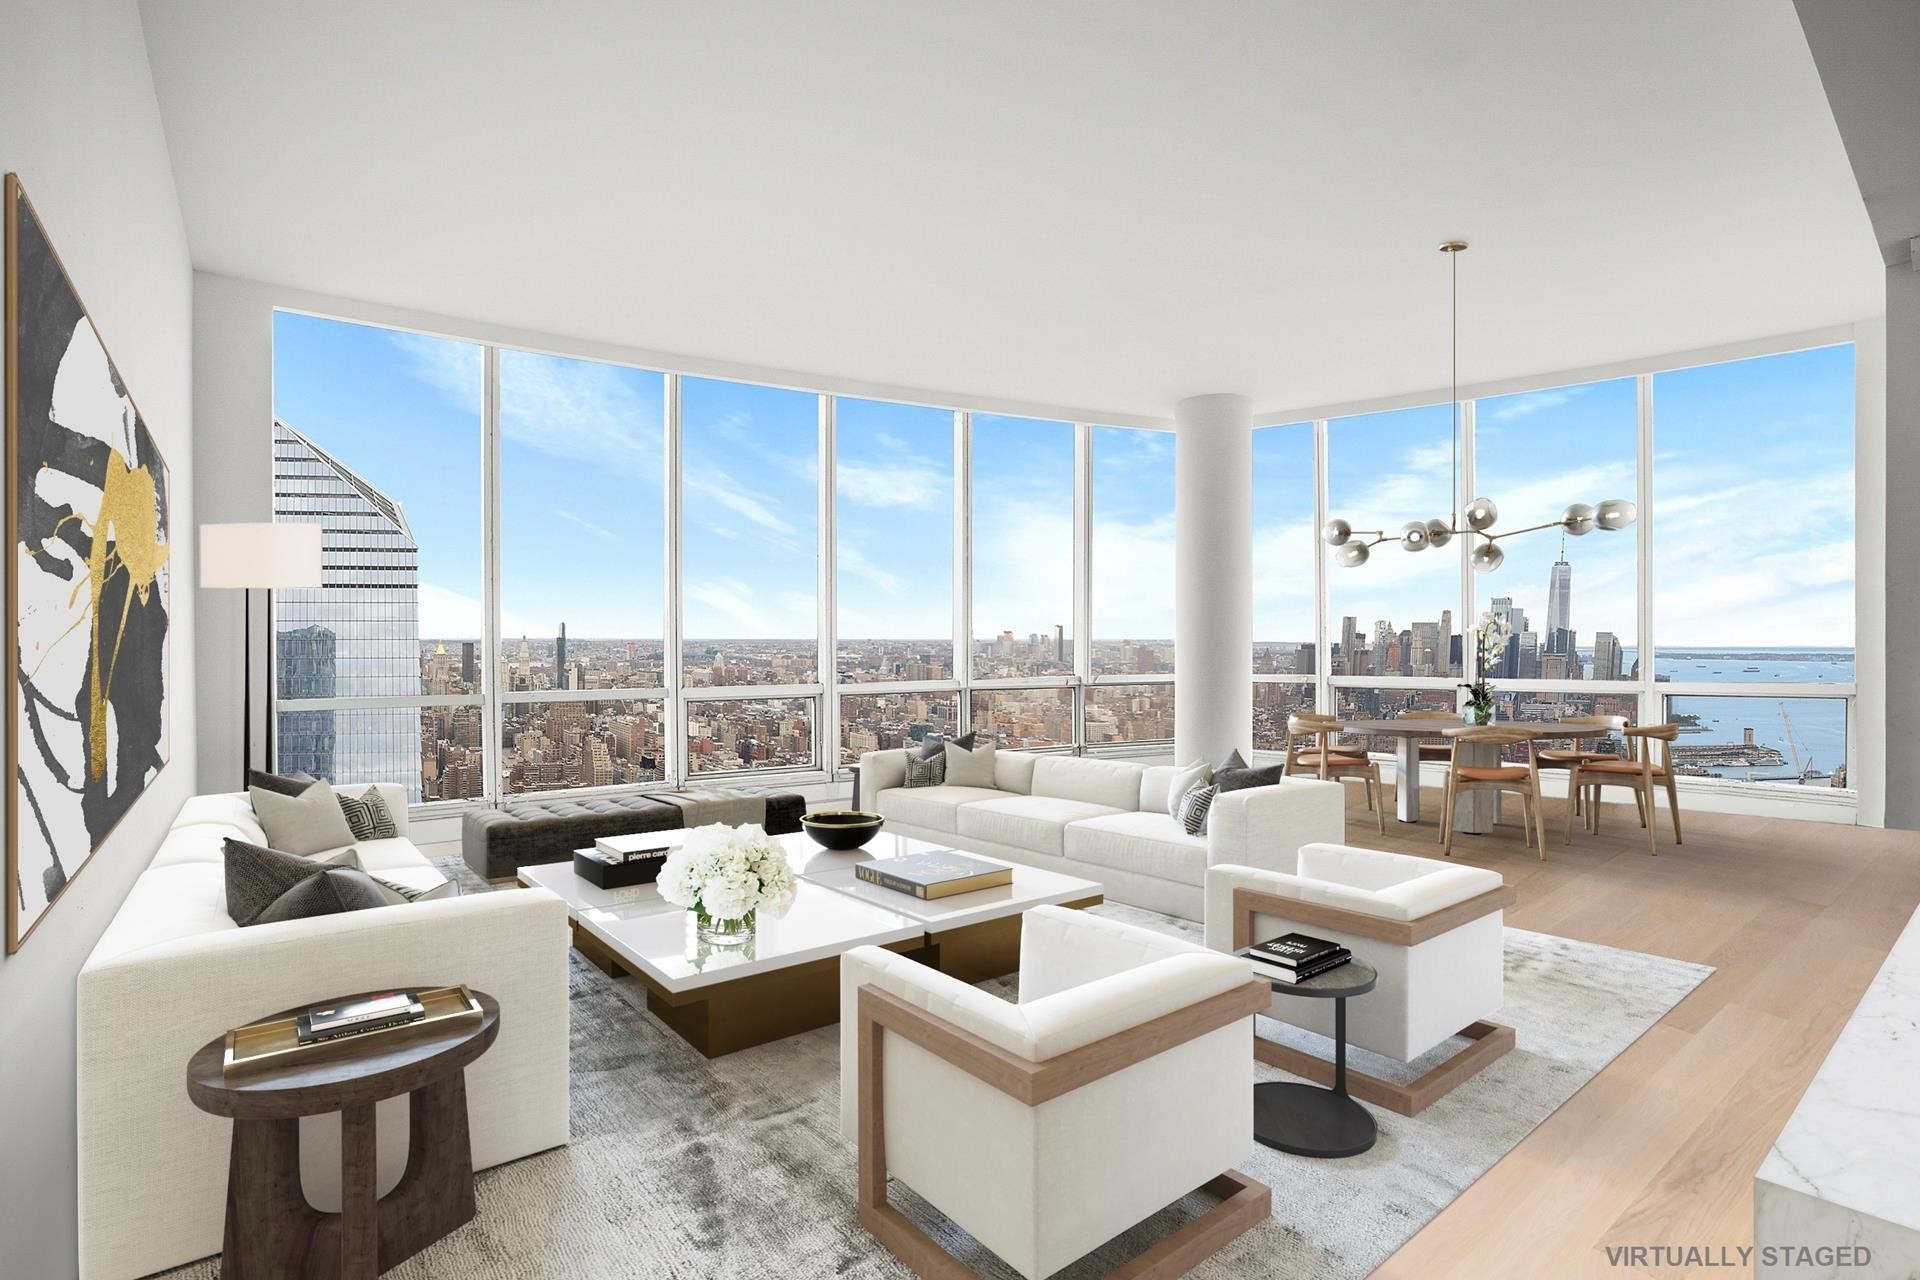 Condominium for Sale at Fifteen Hudson Yards, 15 HUDSON YARDS, 71A Hudson Yards, New York, New York 10001